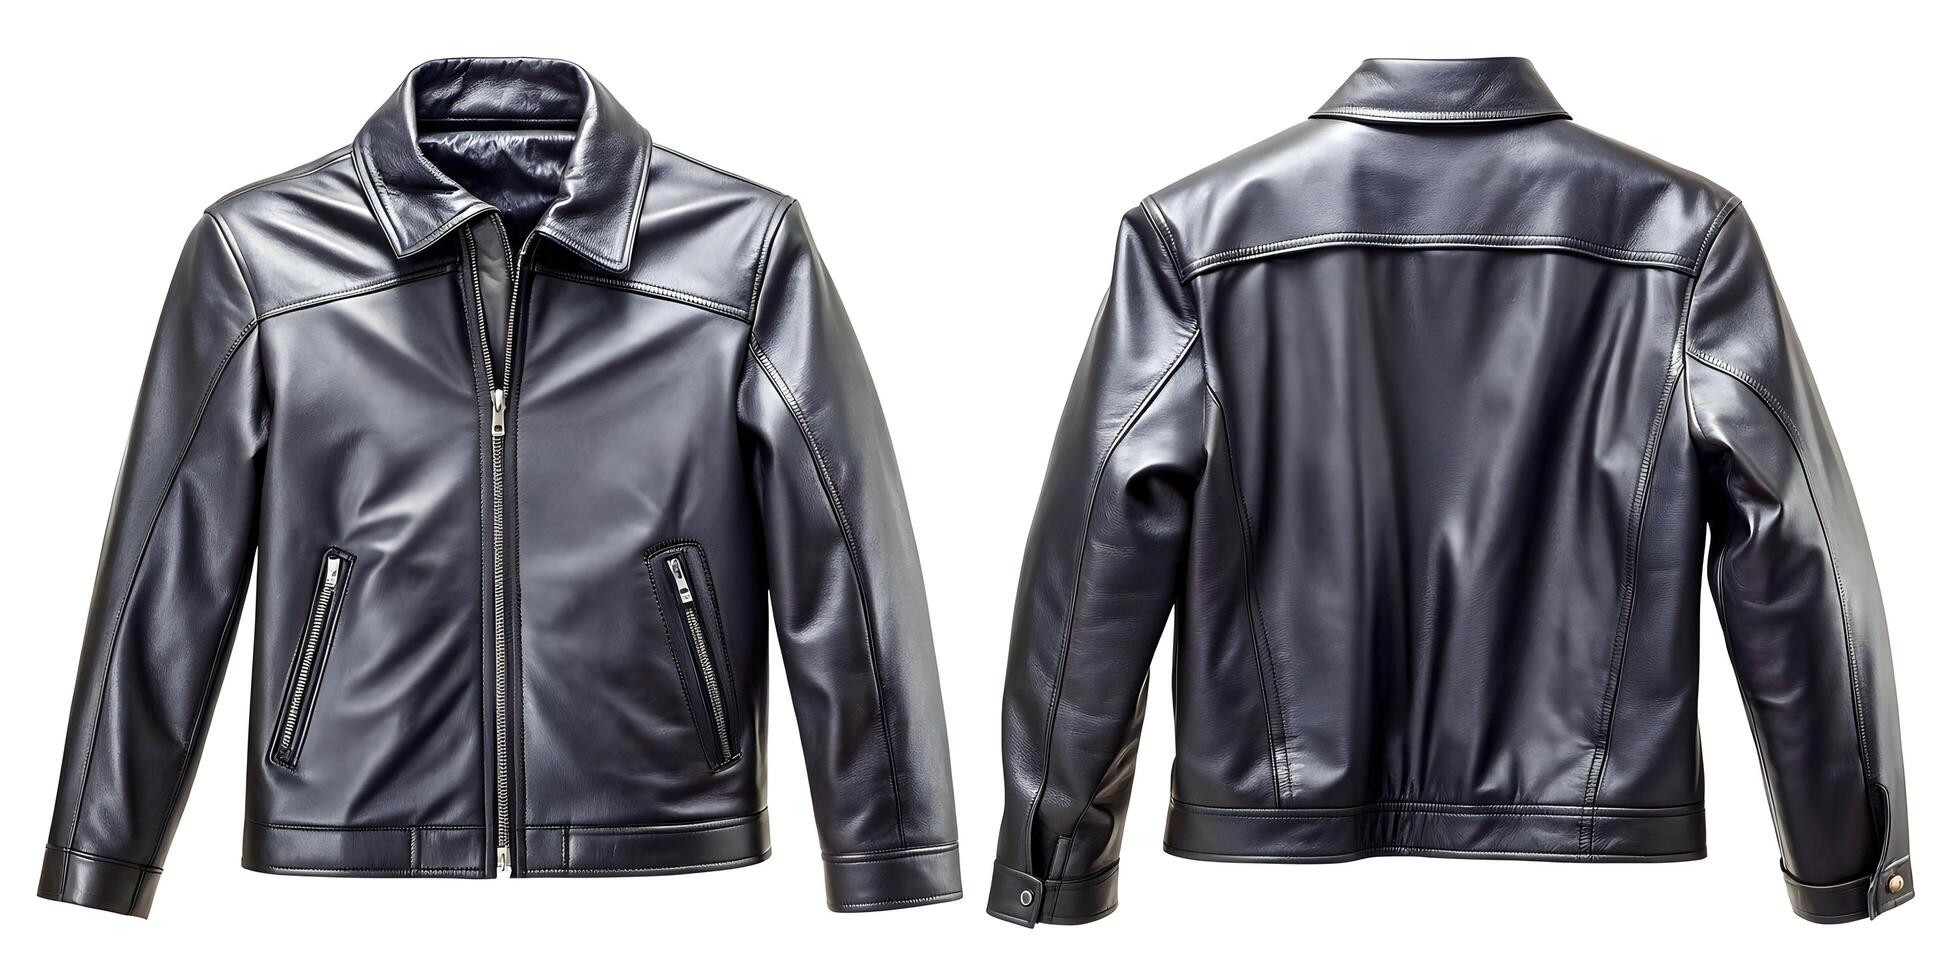 Classic Black Biker Jacket, Front and Back Views photo